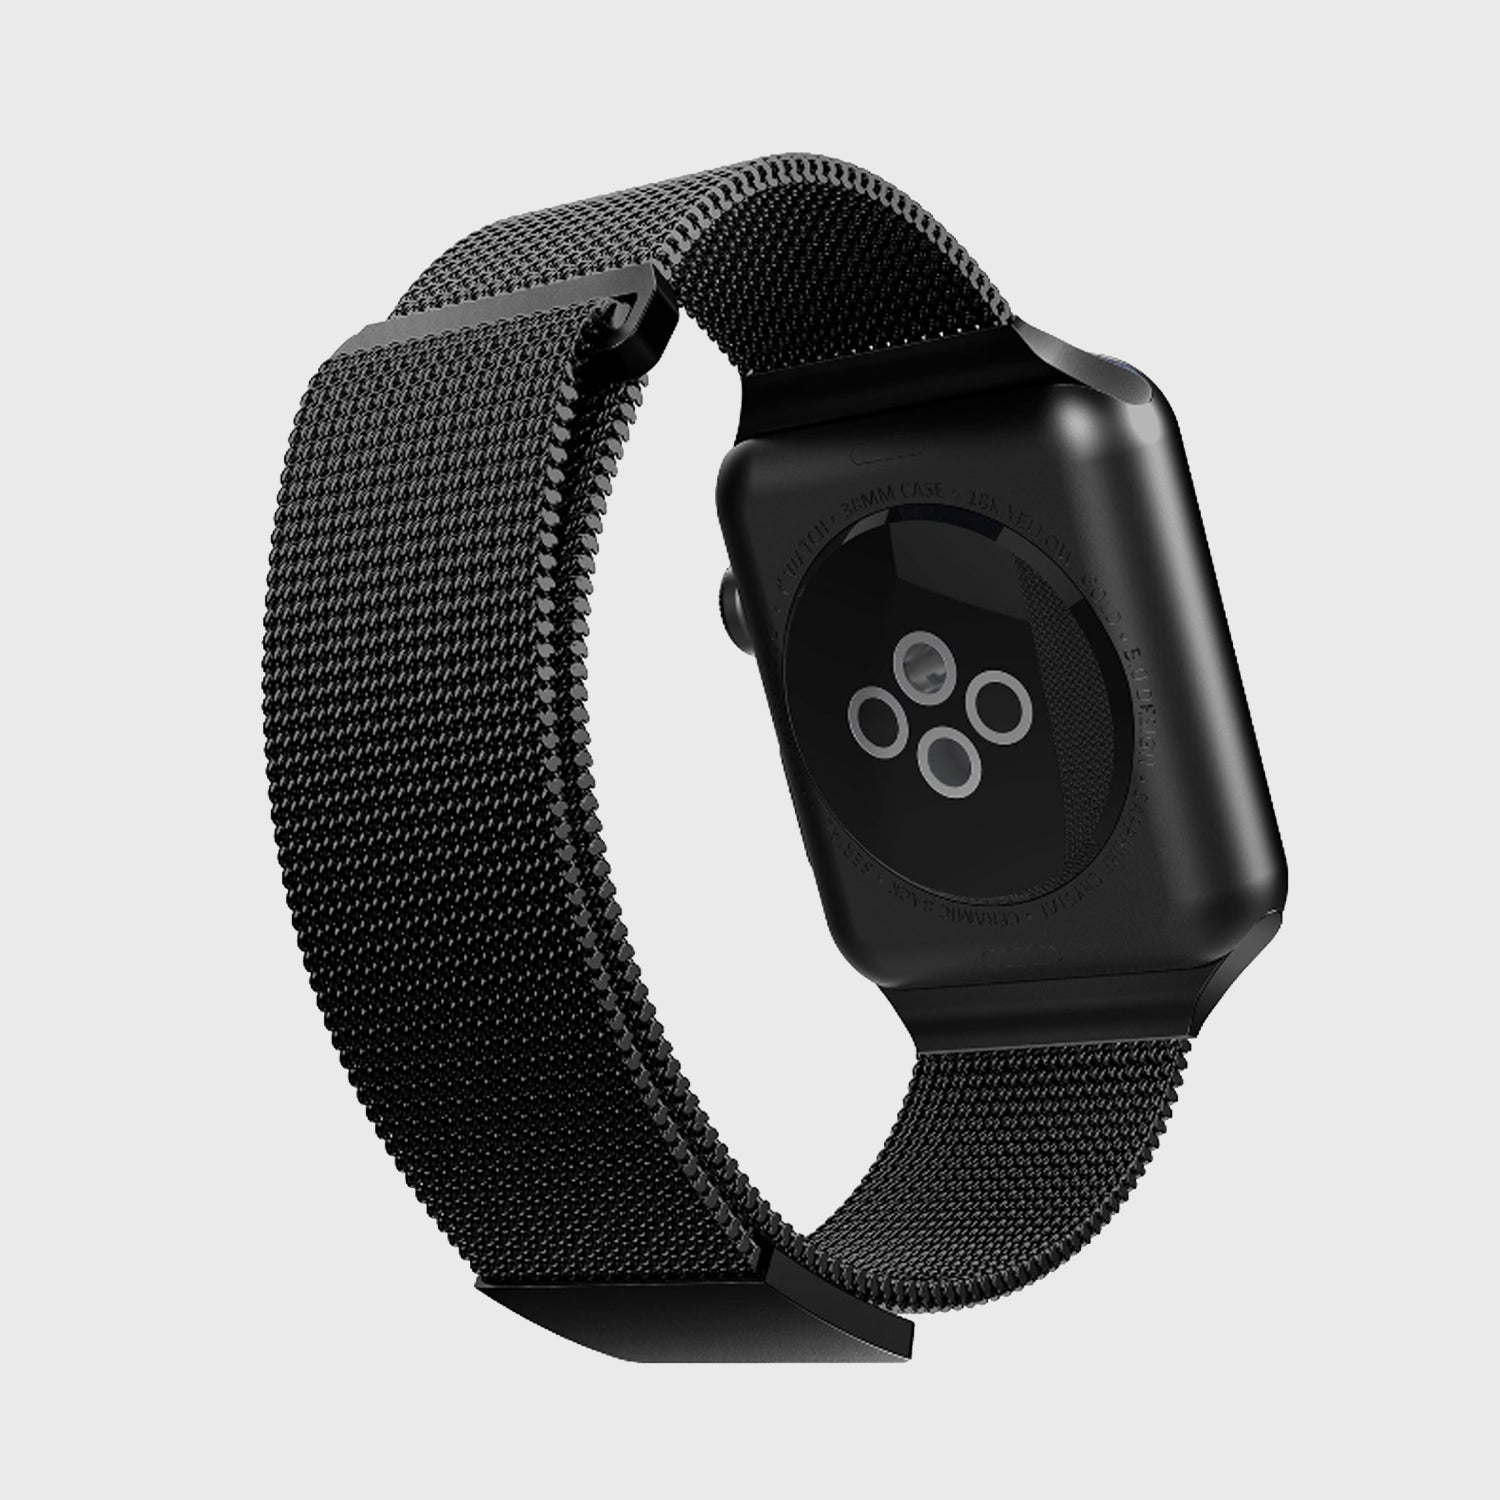 A sleek Raptic Apple Watch featuring a black MESH BAND made of stainless steel.